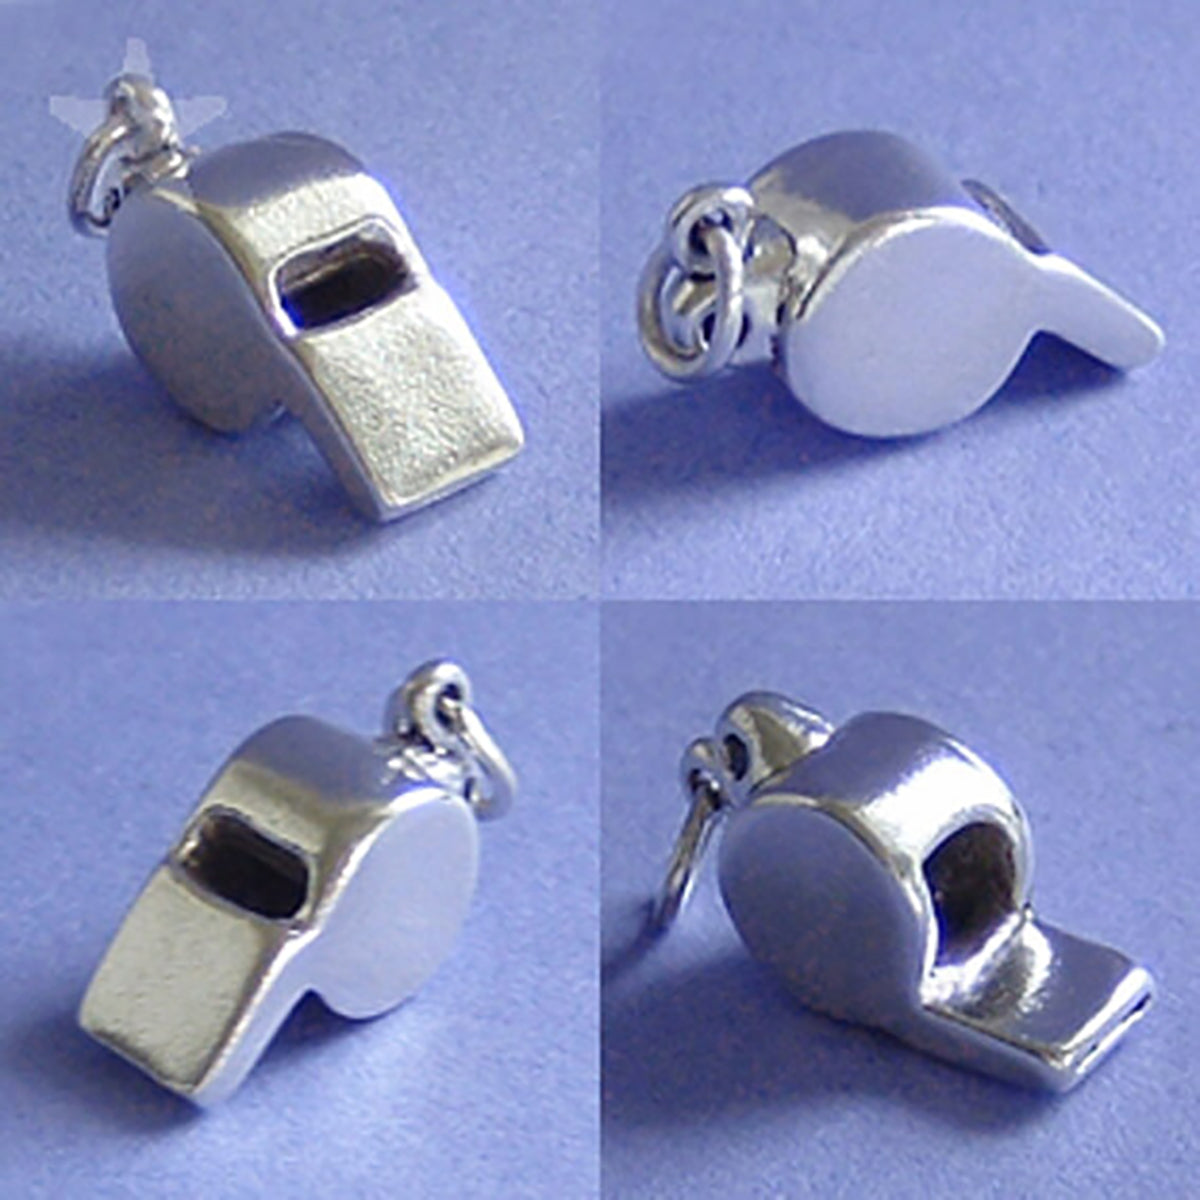 Valkeen whistle charm sterling silver pendant